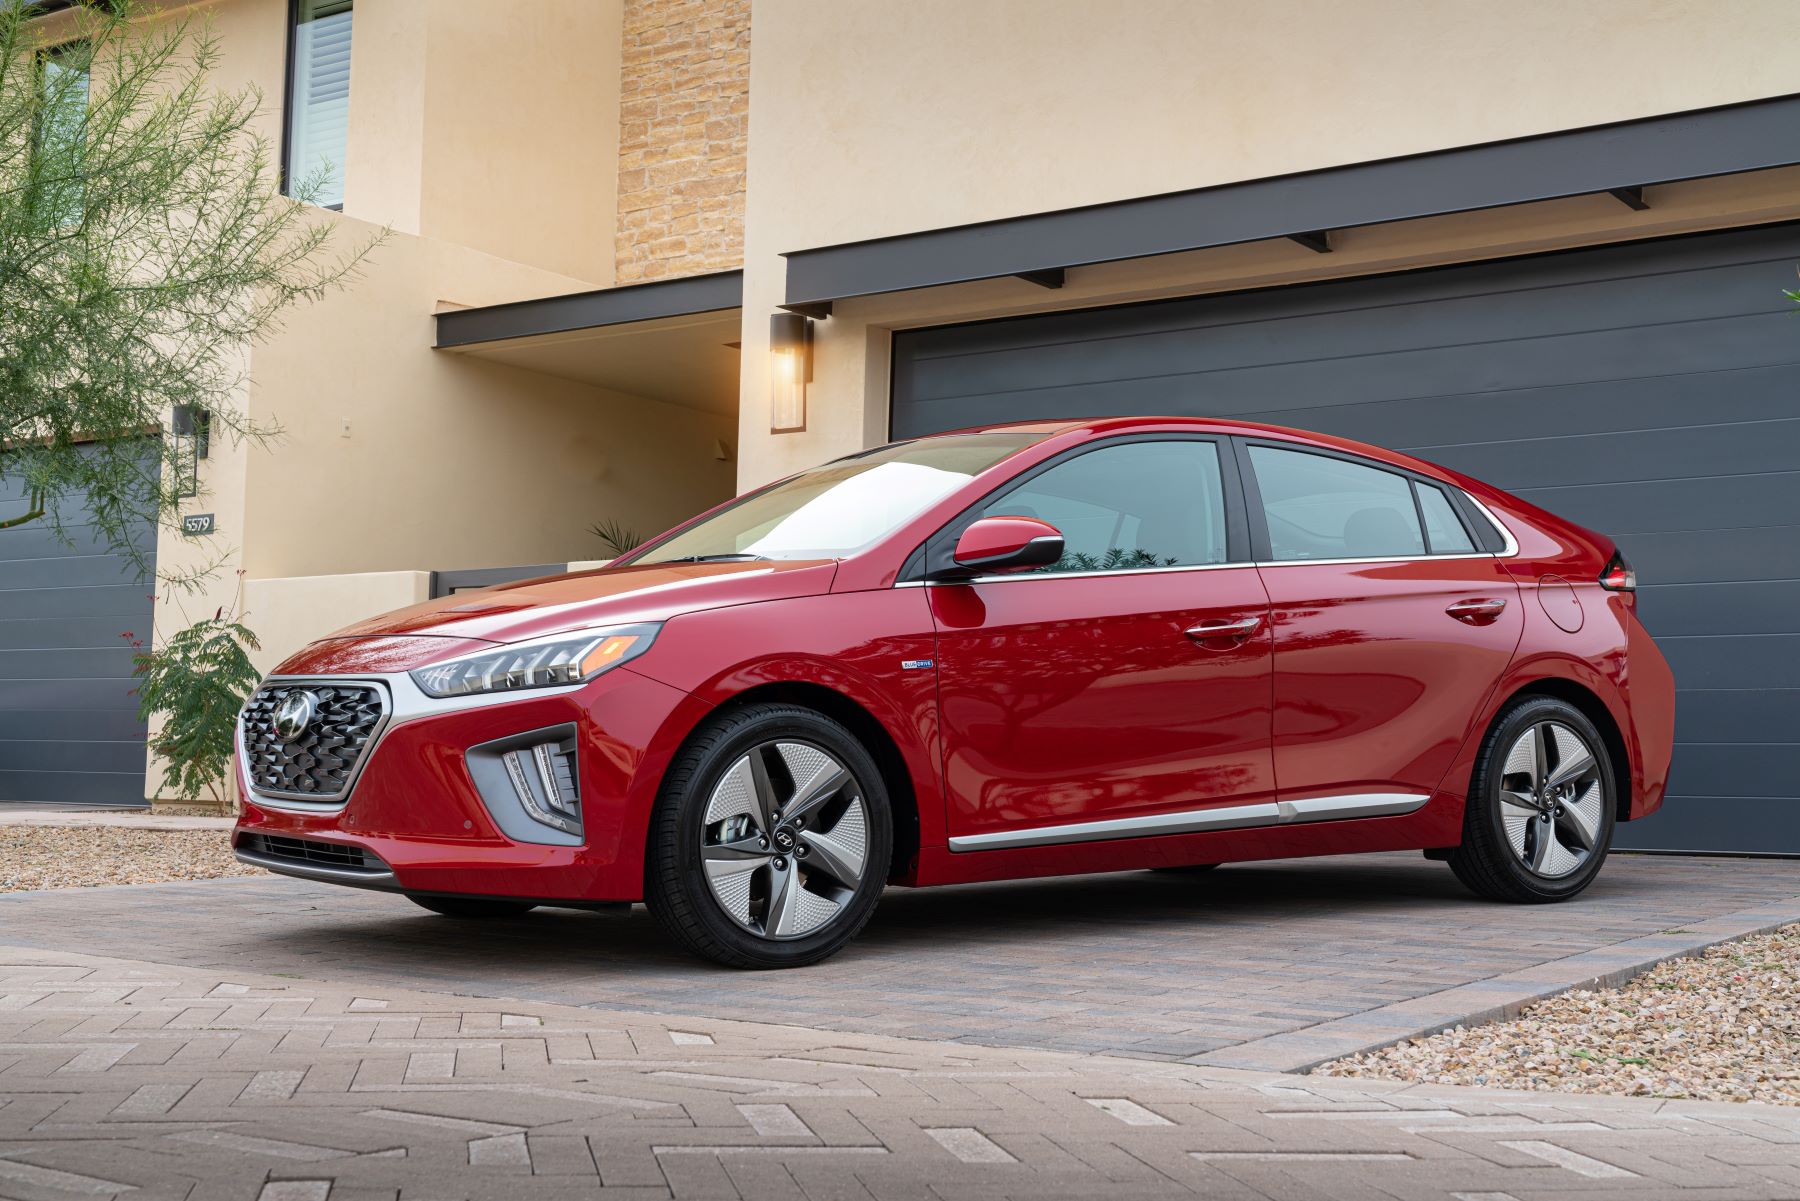 The 2022 Hyundai Ioniq Hybrid hatchback model in red parked outside of a home garage on a cobblestone driveway